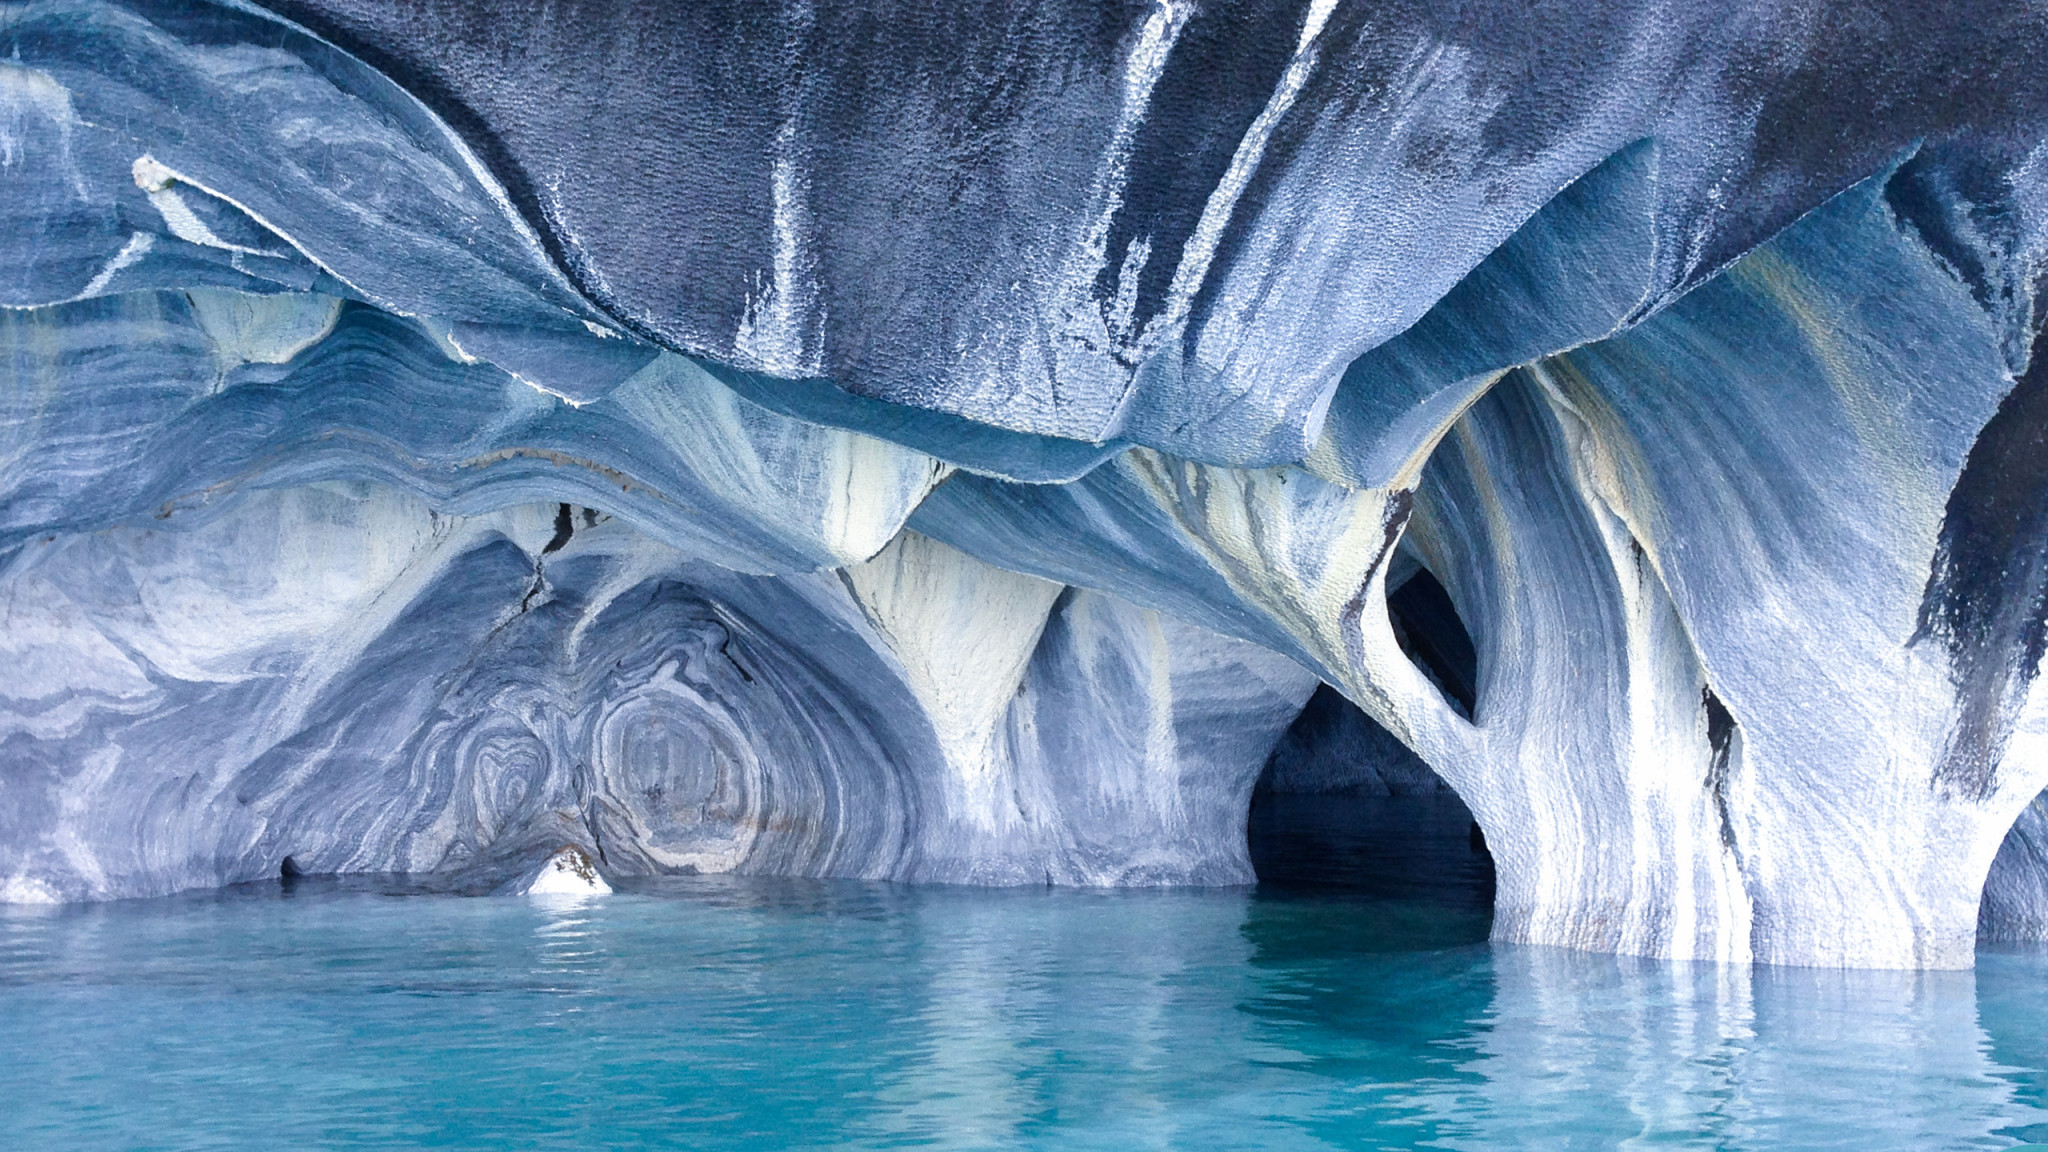 The Marble Caves at Lake General Carrera in Chile.